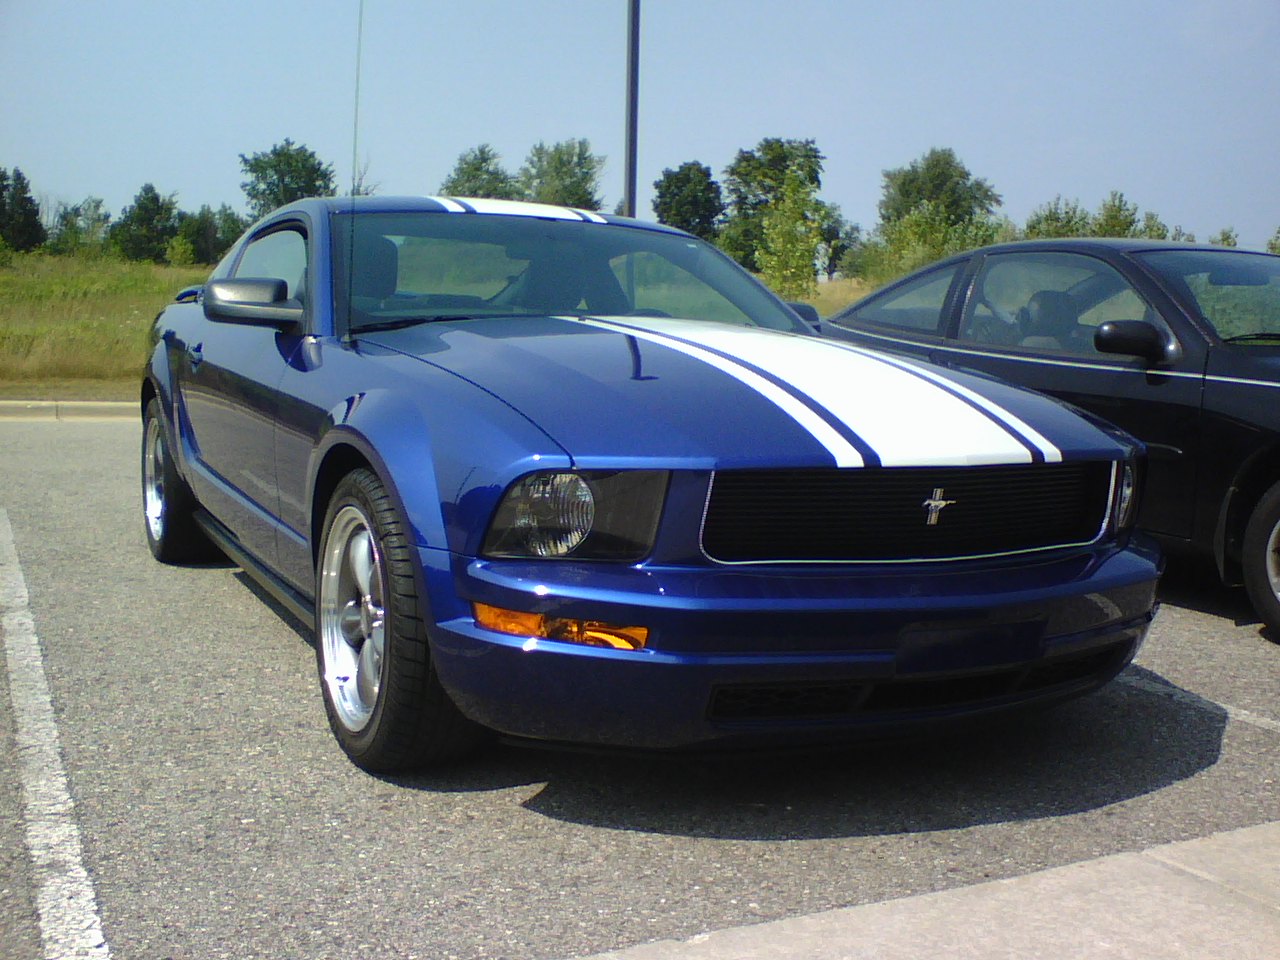 2005 Ford mustang quarter mile time #5